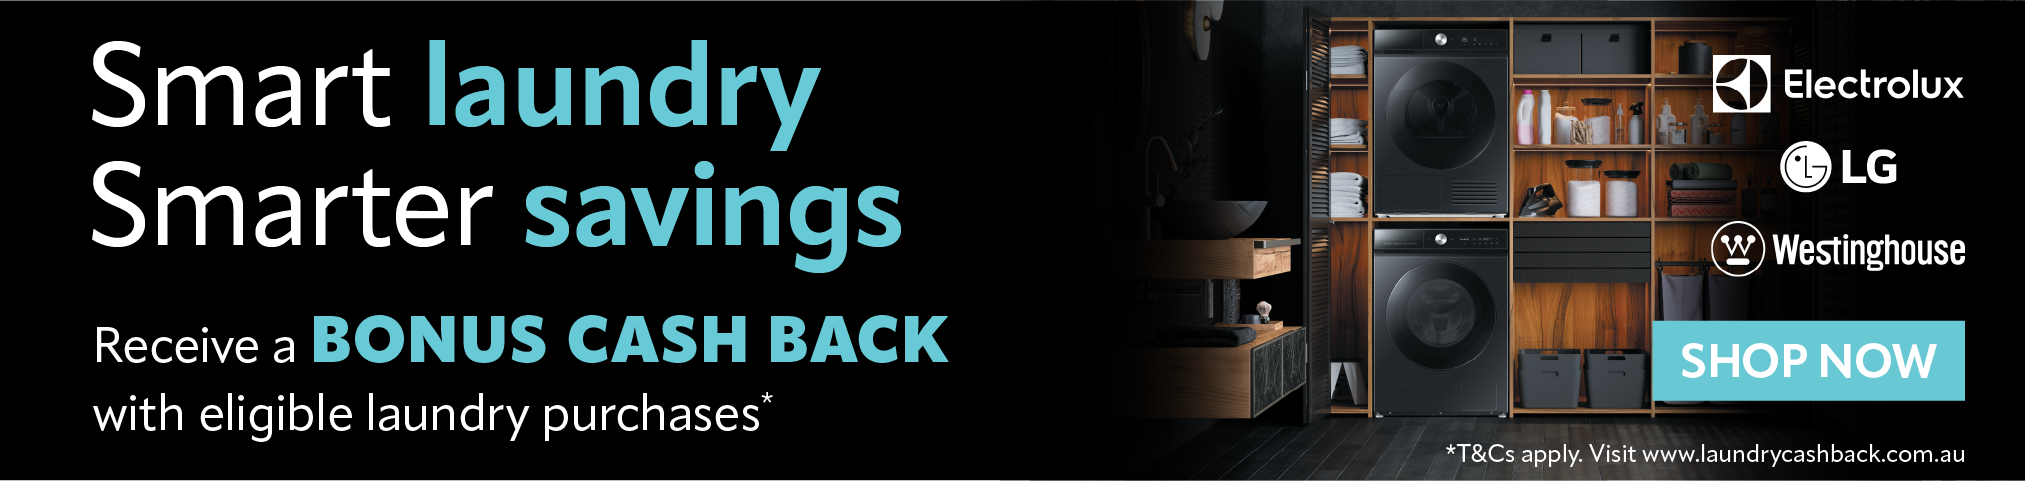 Receive A Bonus Cash Back Up To $400 On Eligible Laundry Purchases*